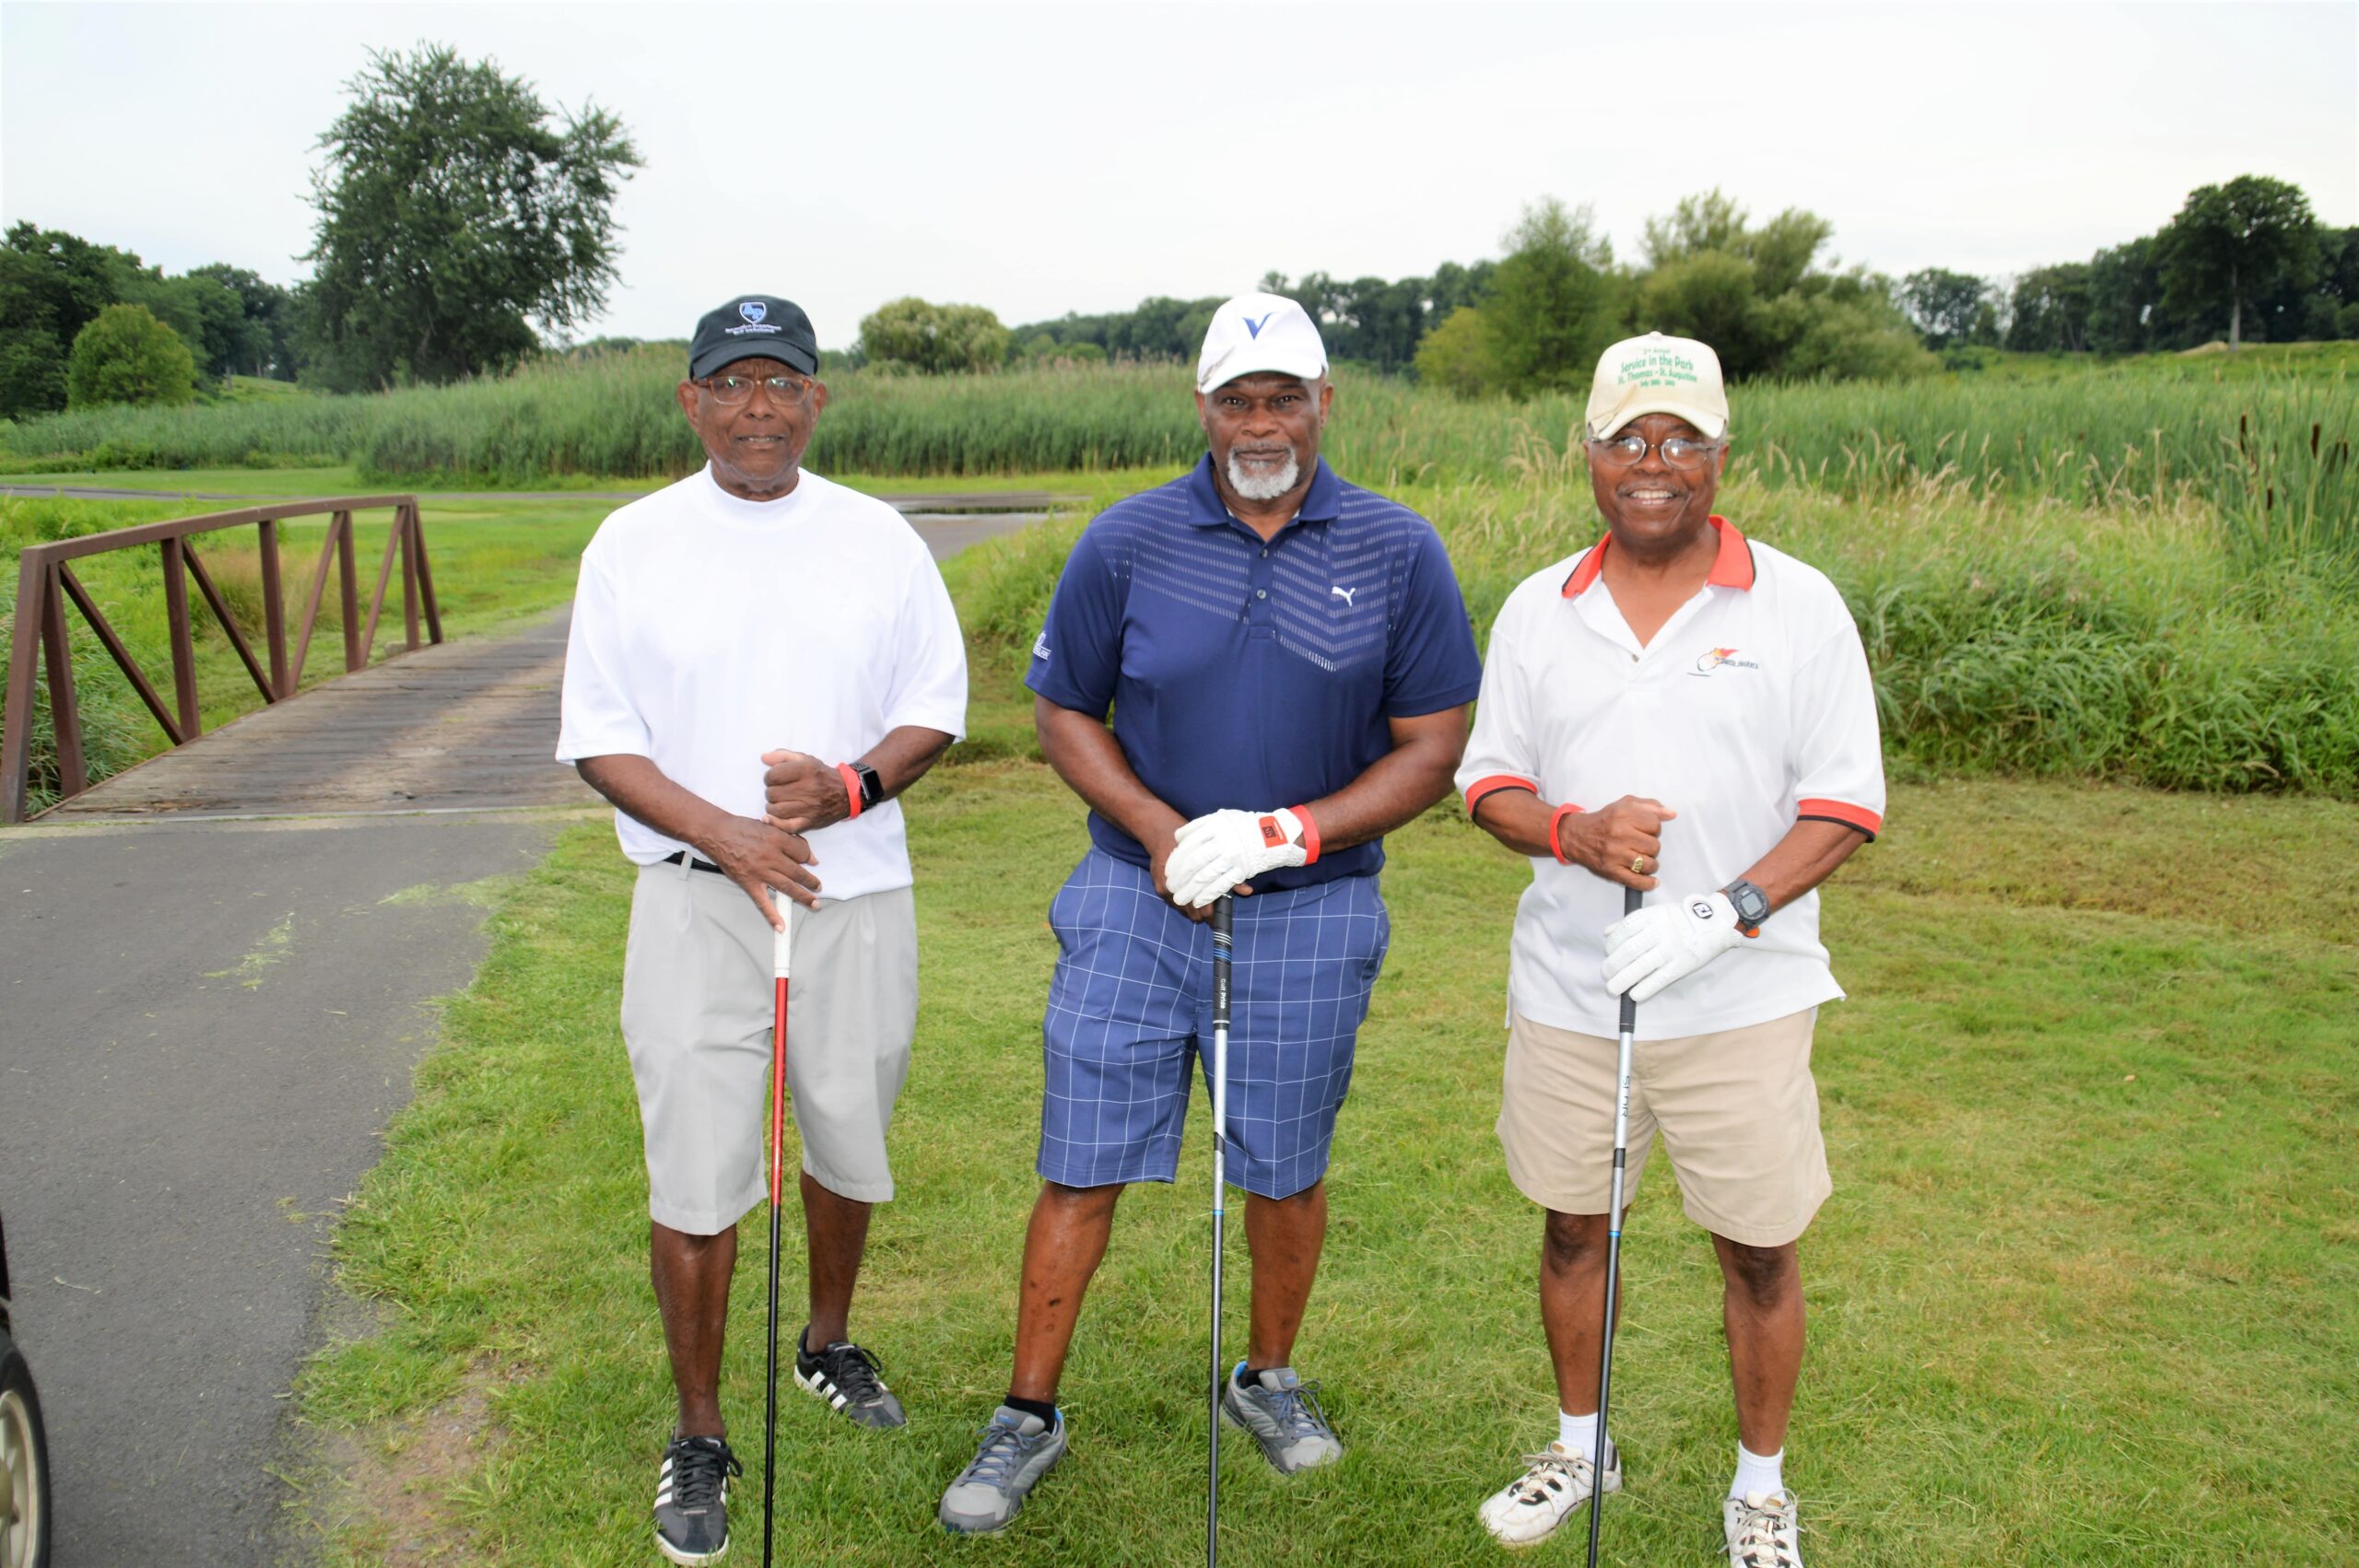 2018 GOLF OUTING – 18